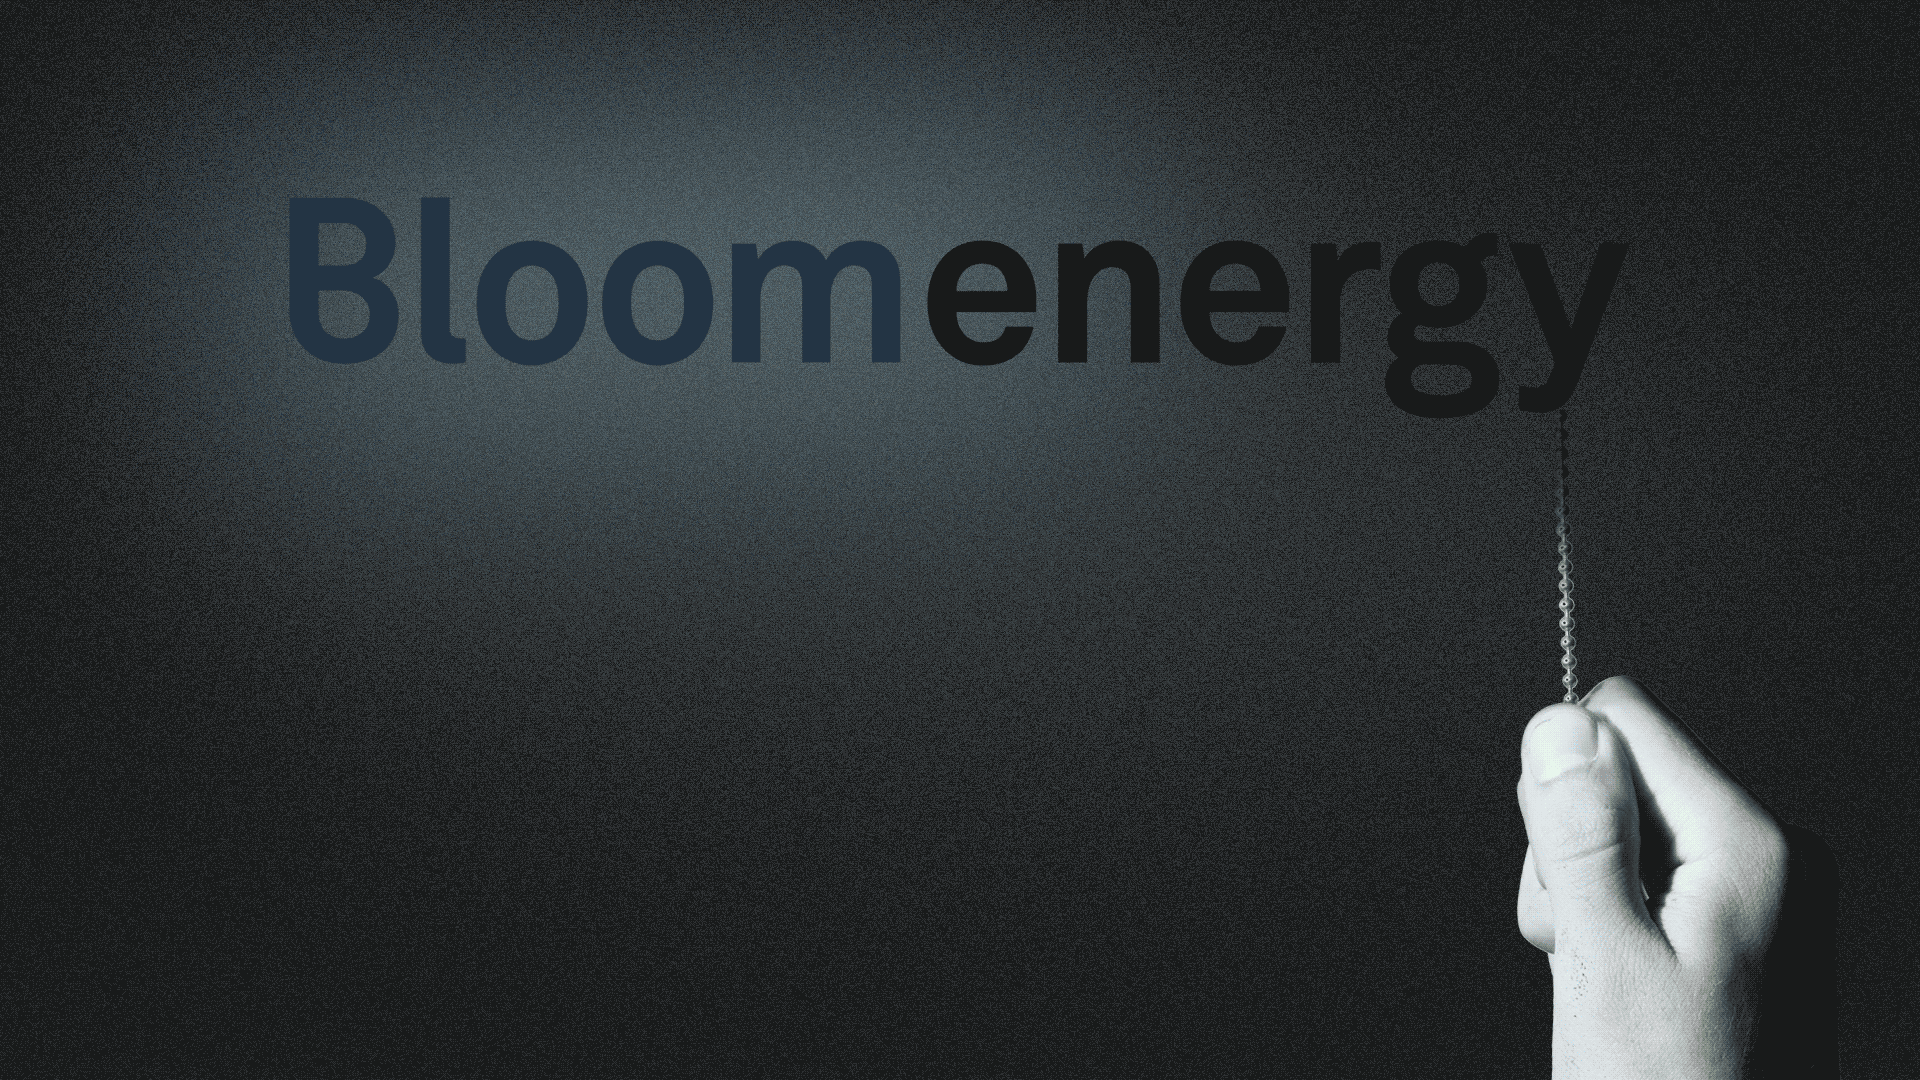 Animated GIF of the Bloom energy logo being turned off by a hand.